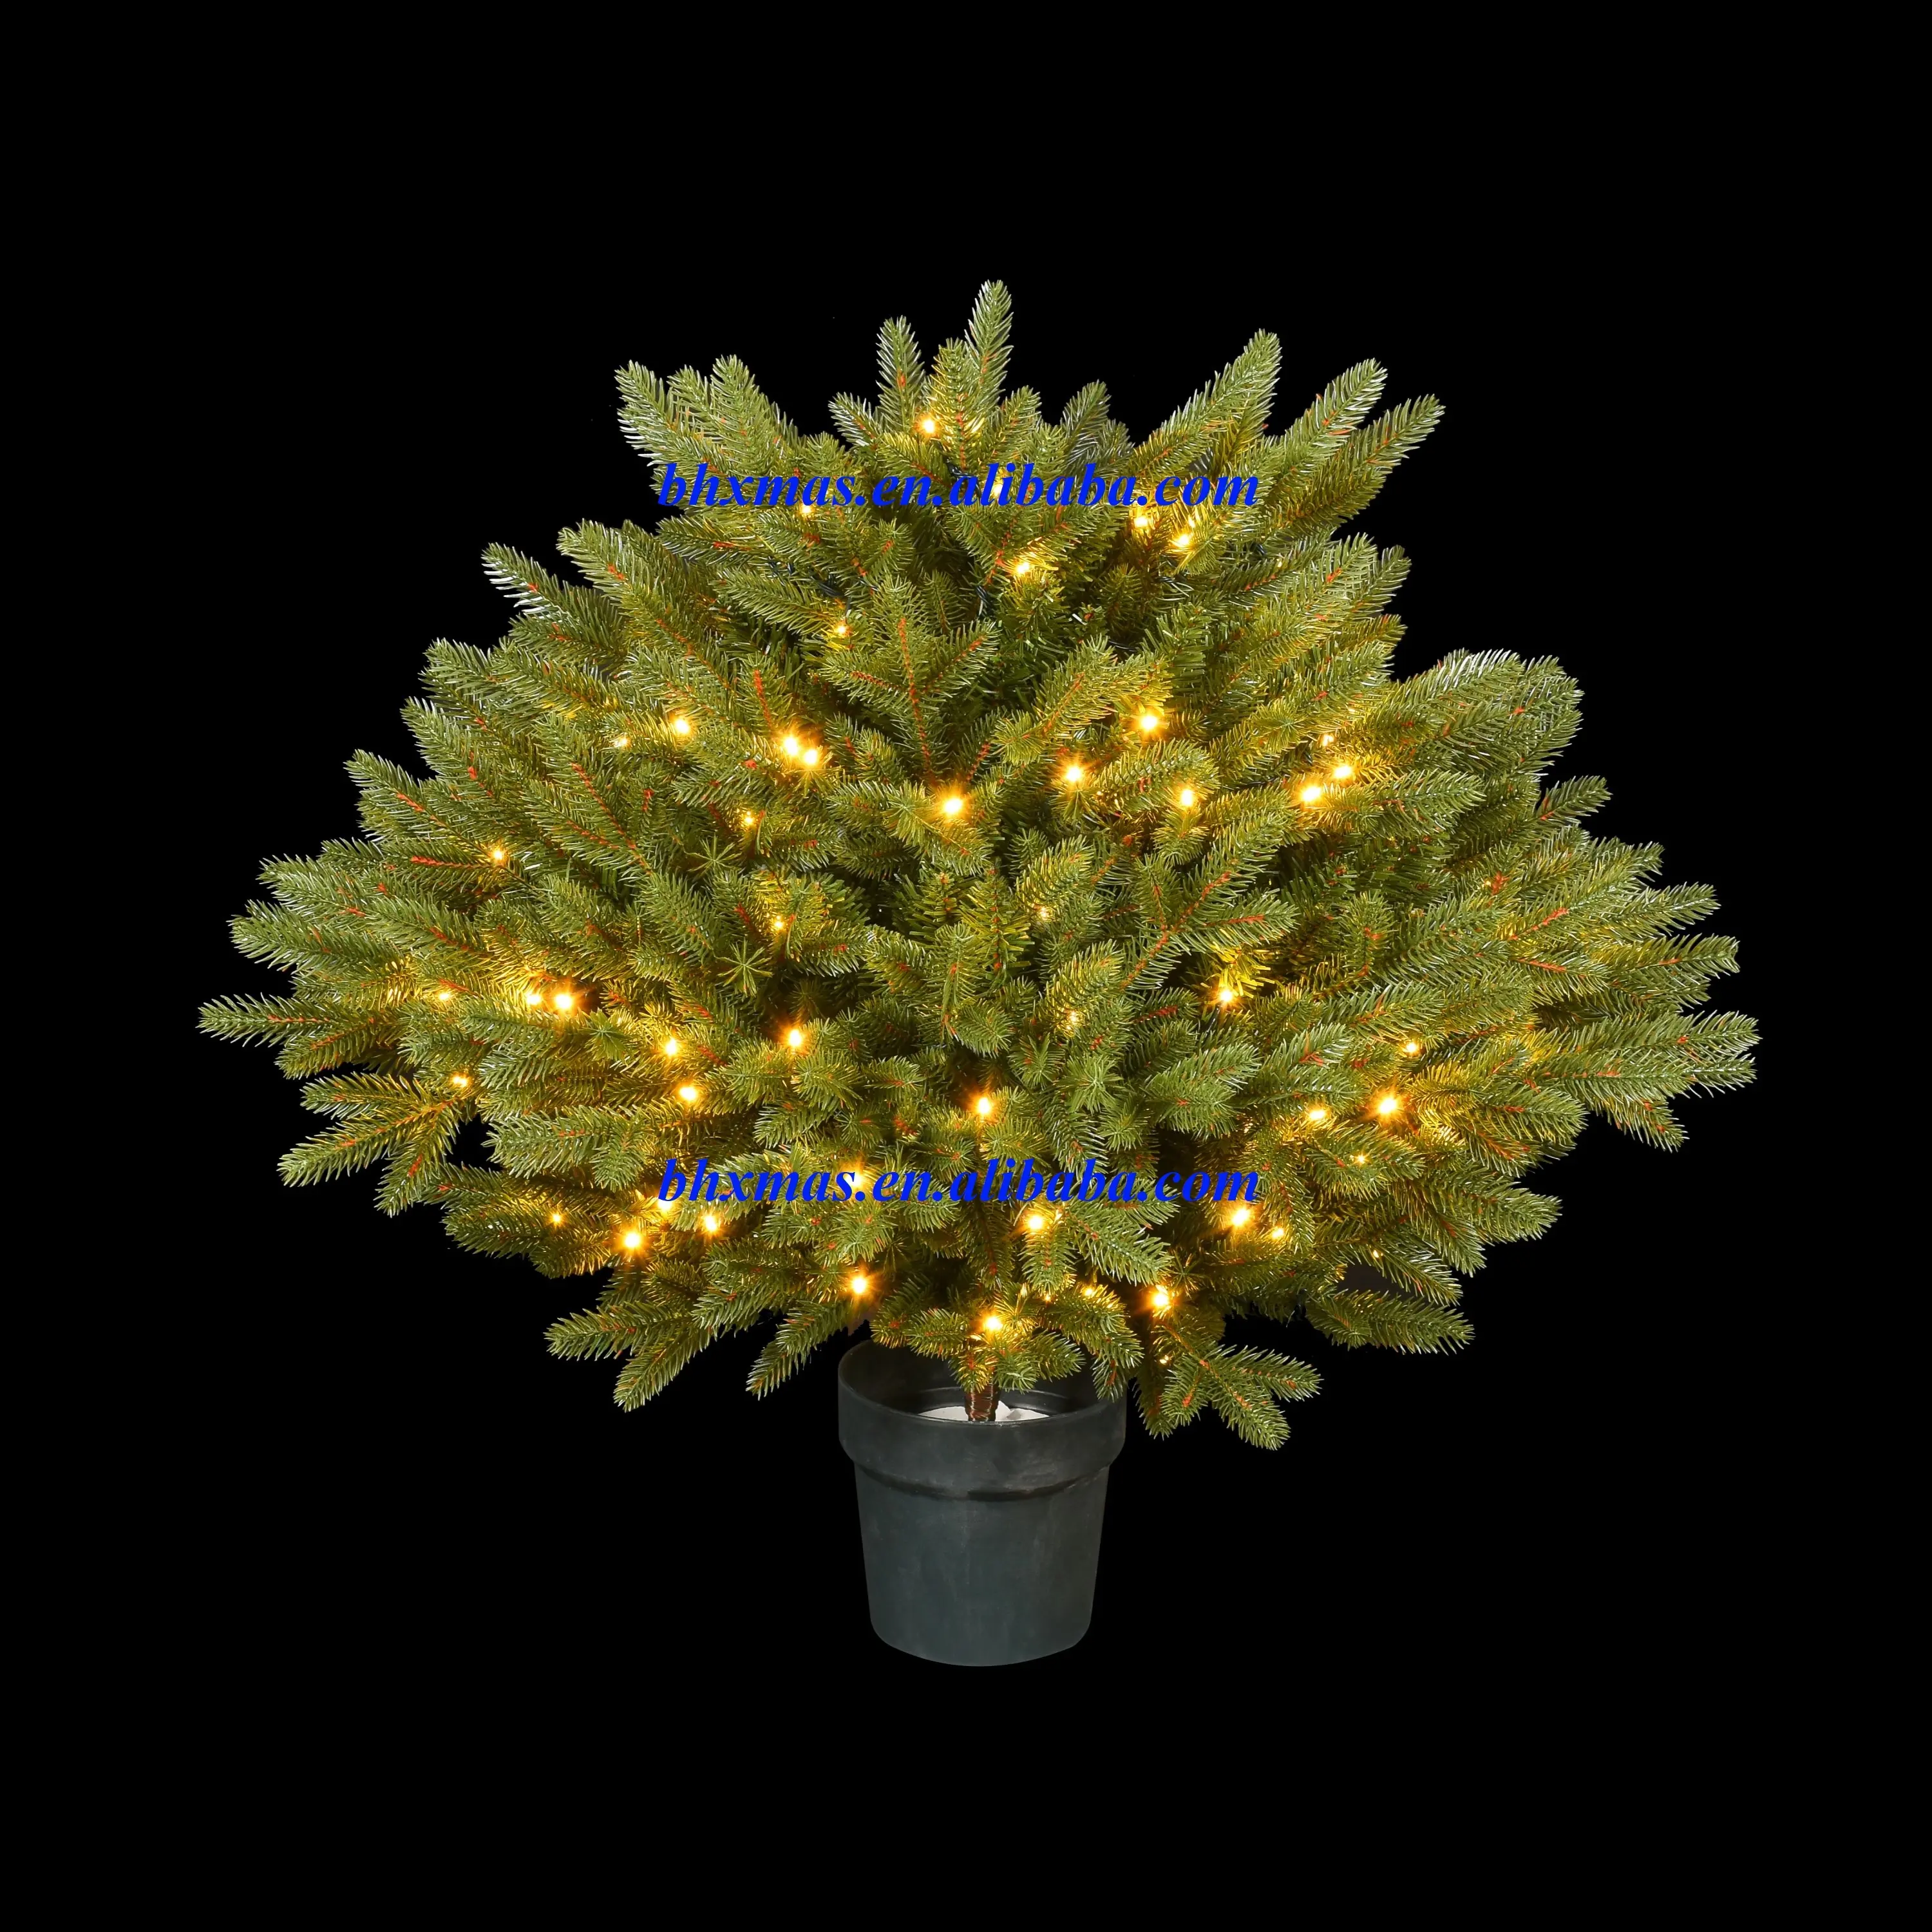 Top Quality Round Pre-lit Christmas Tree With Pot Luxury Artificial PE PVC Mixed Xmas Tree Factory Direct Sale MODEL:BHTL2241